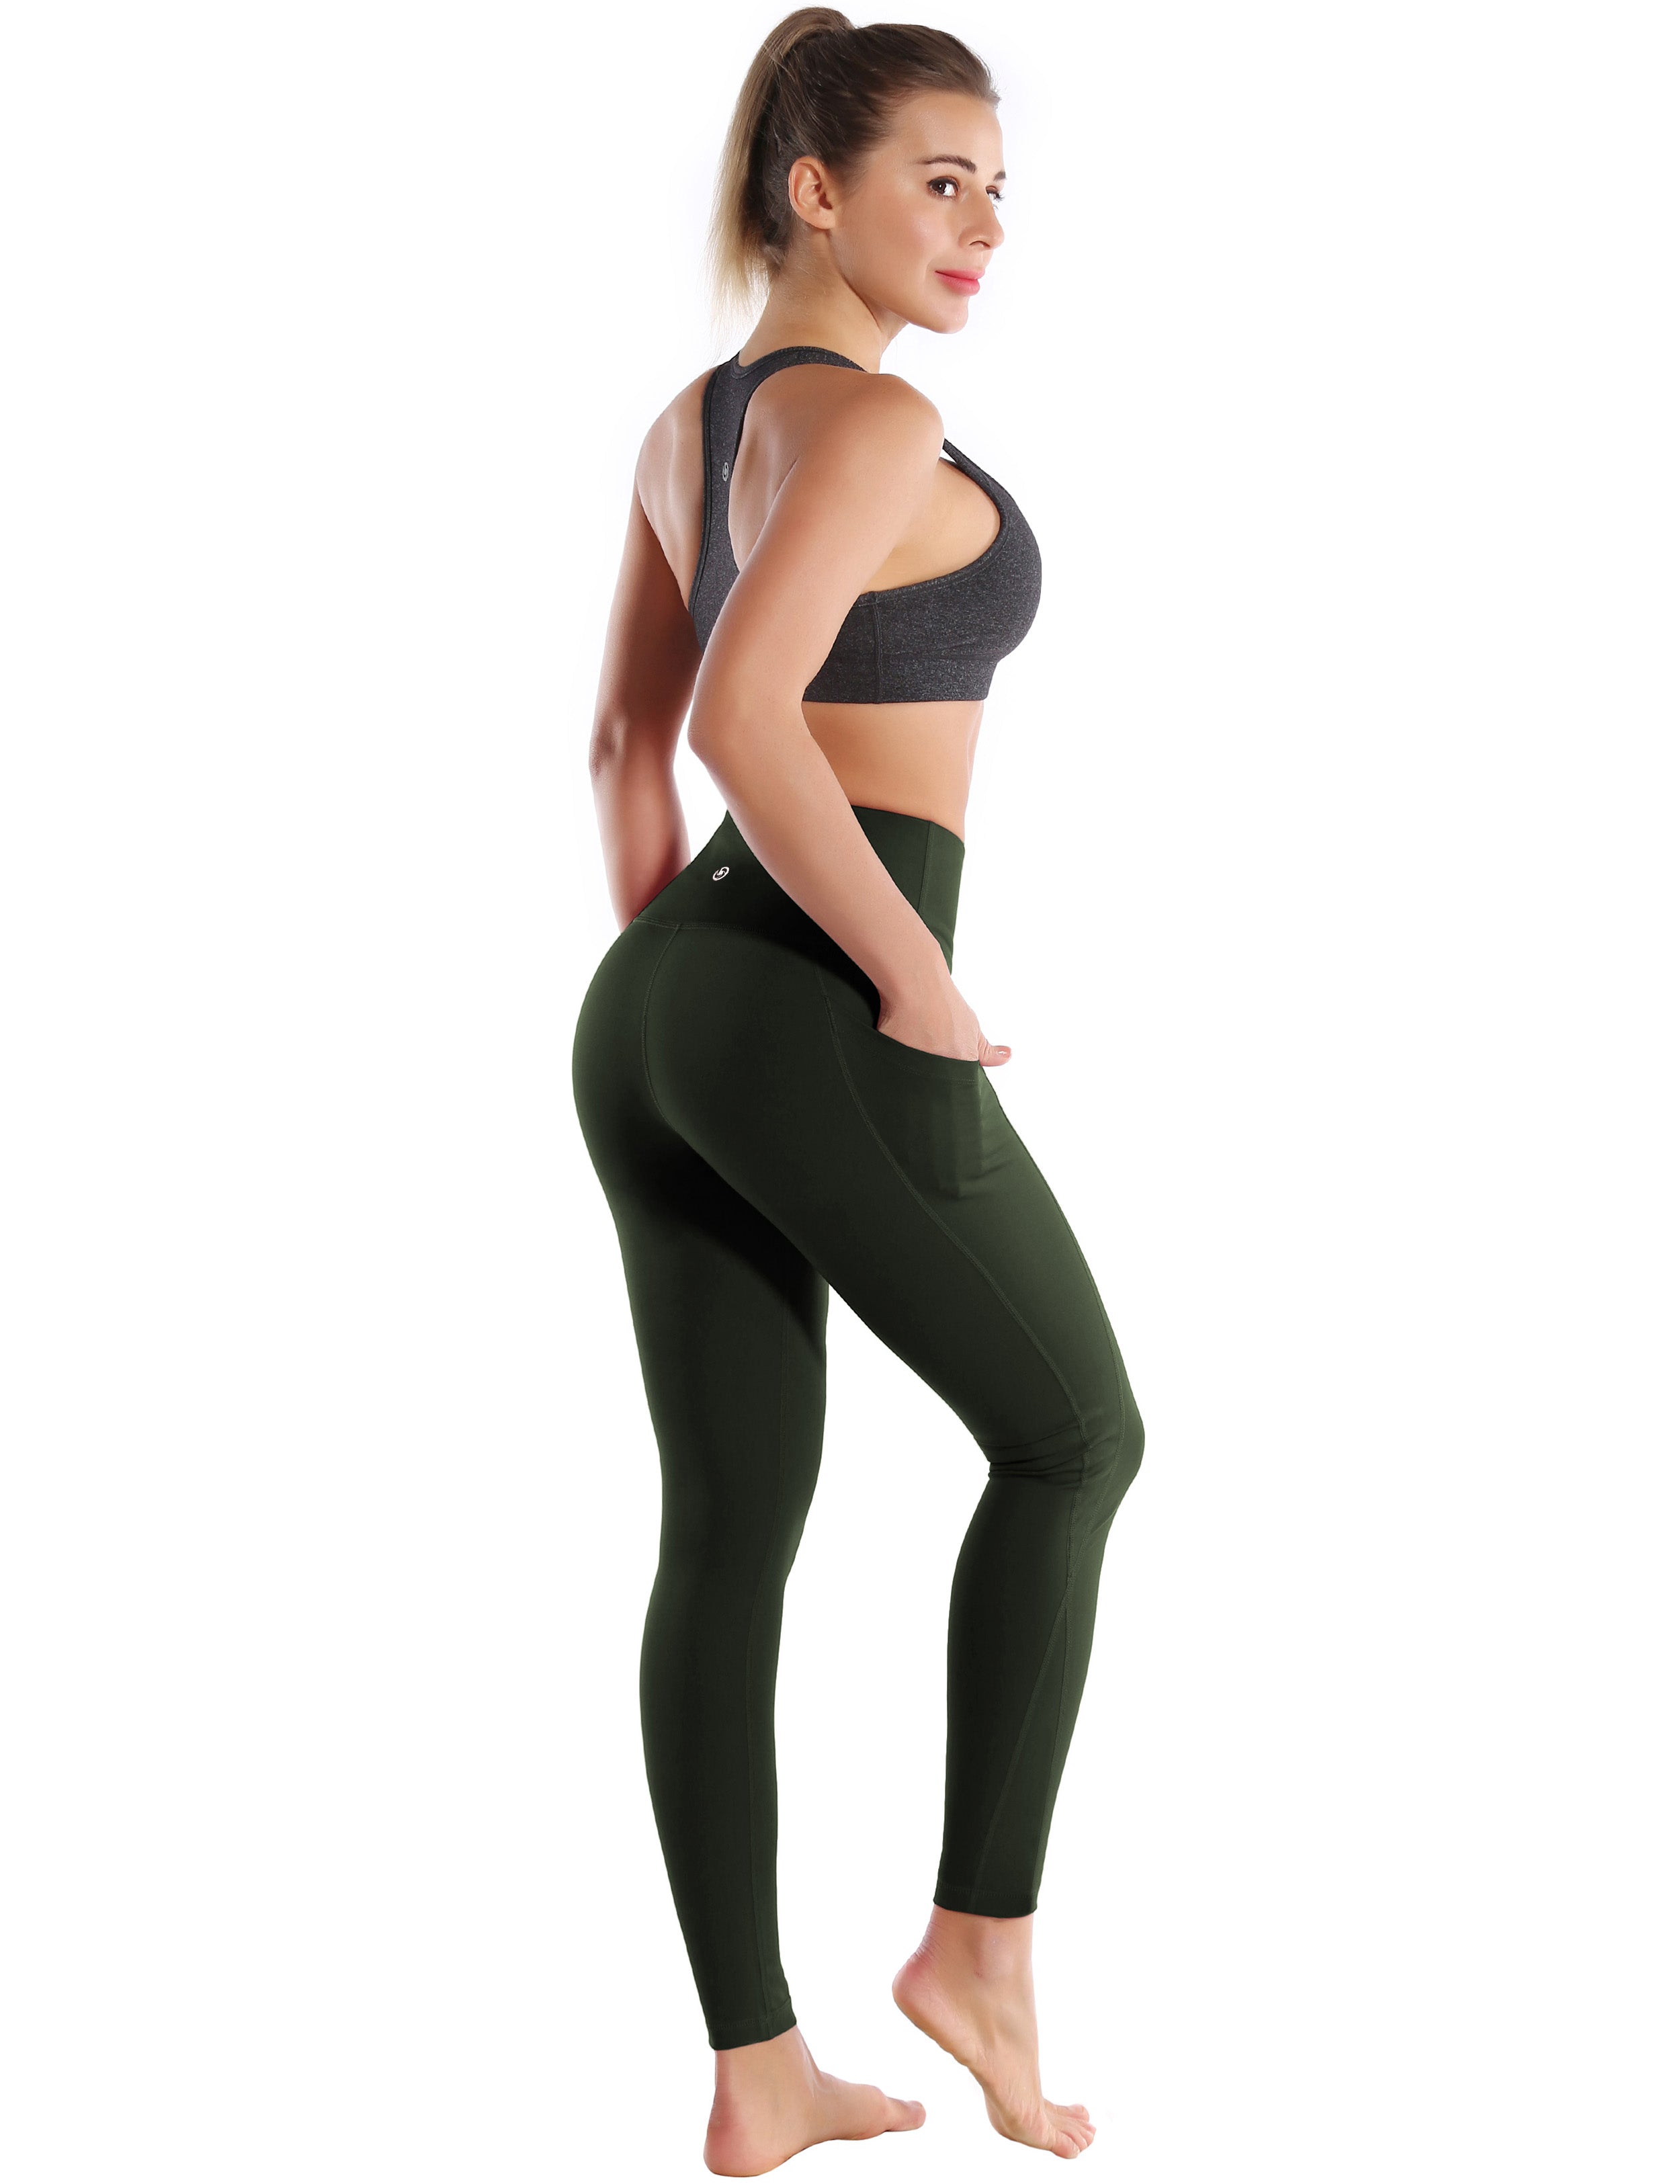 High Waist Side Pockets Gym Pants olivegray 75% Nylon, 25% Spandex Fabric doesn't attract lint easily 4-way stretch No see-through Moisture-wicking Tummy control Inner pocket